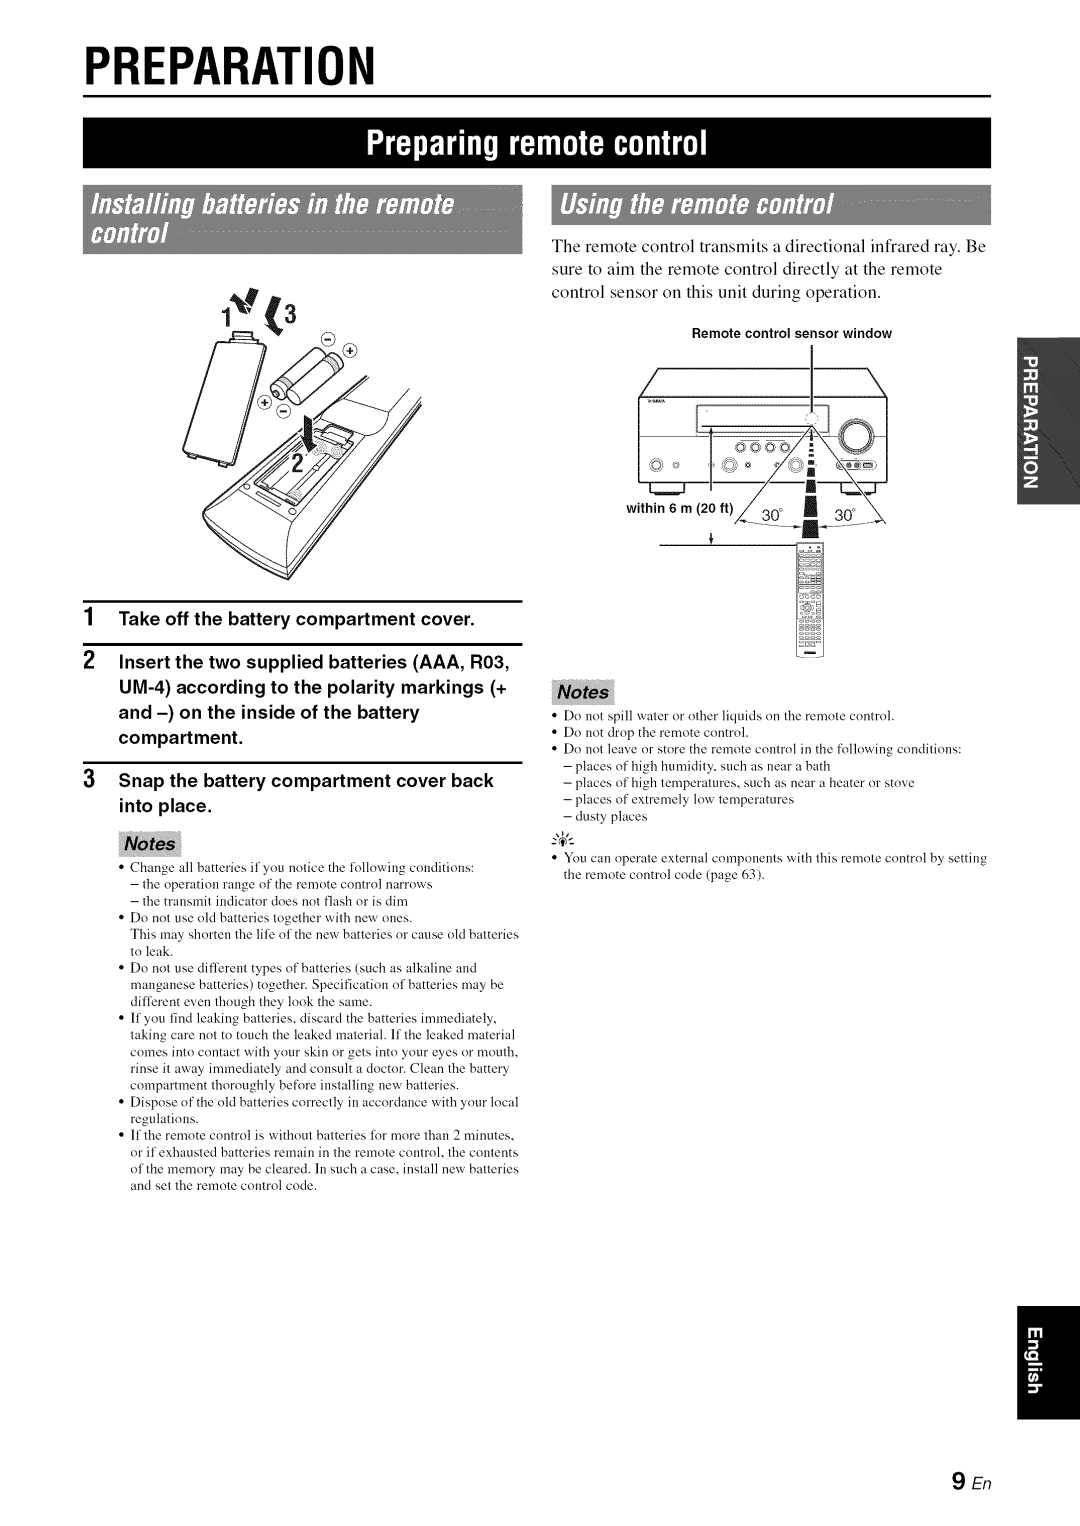 Yamaha RX-V1065 owner manual Preparation, _%,._, 1Take off the battery compartment cover 